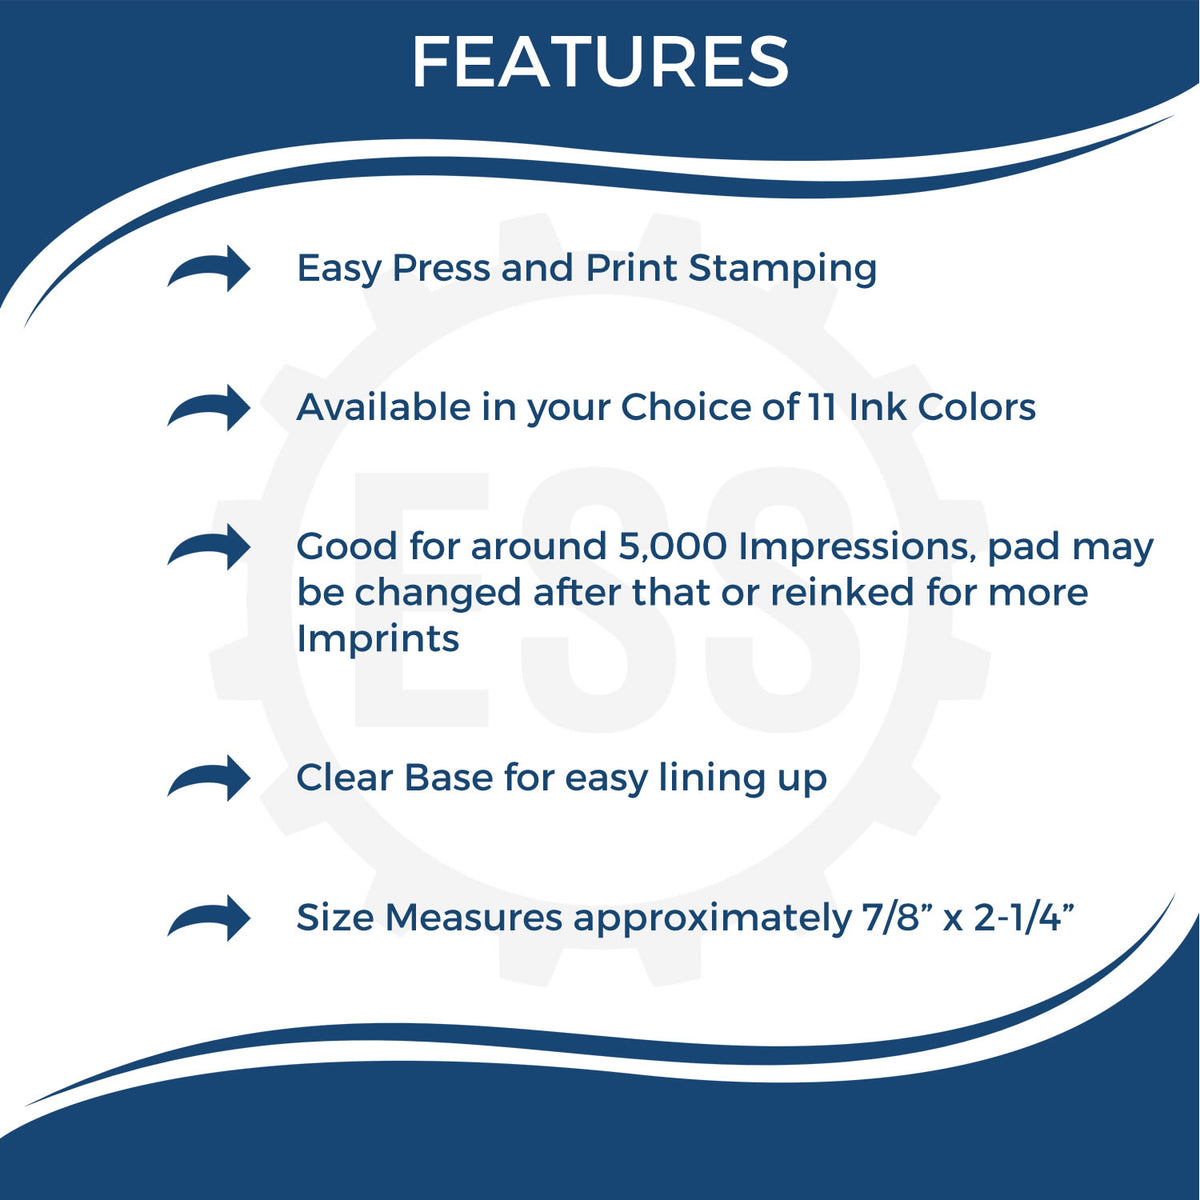 Large Self-Inking Covid-19 Tested Stamp